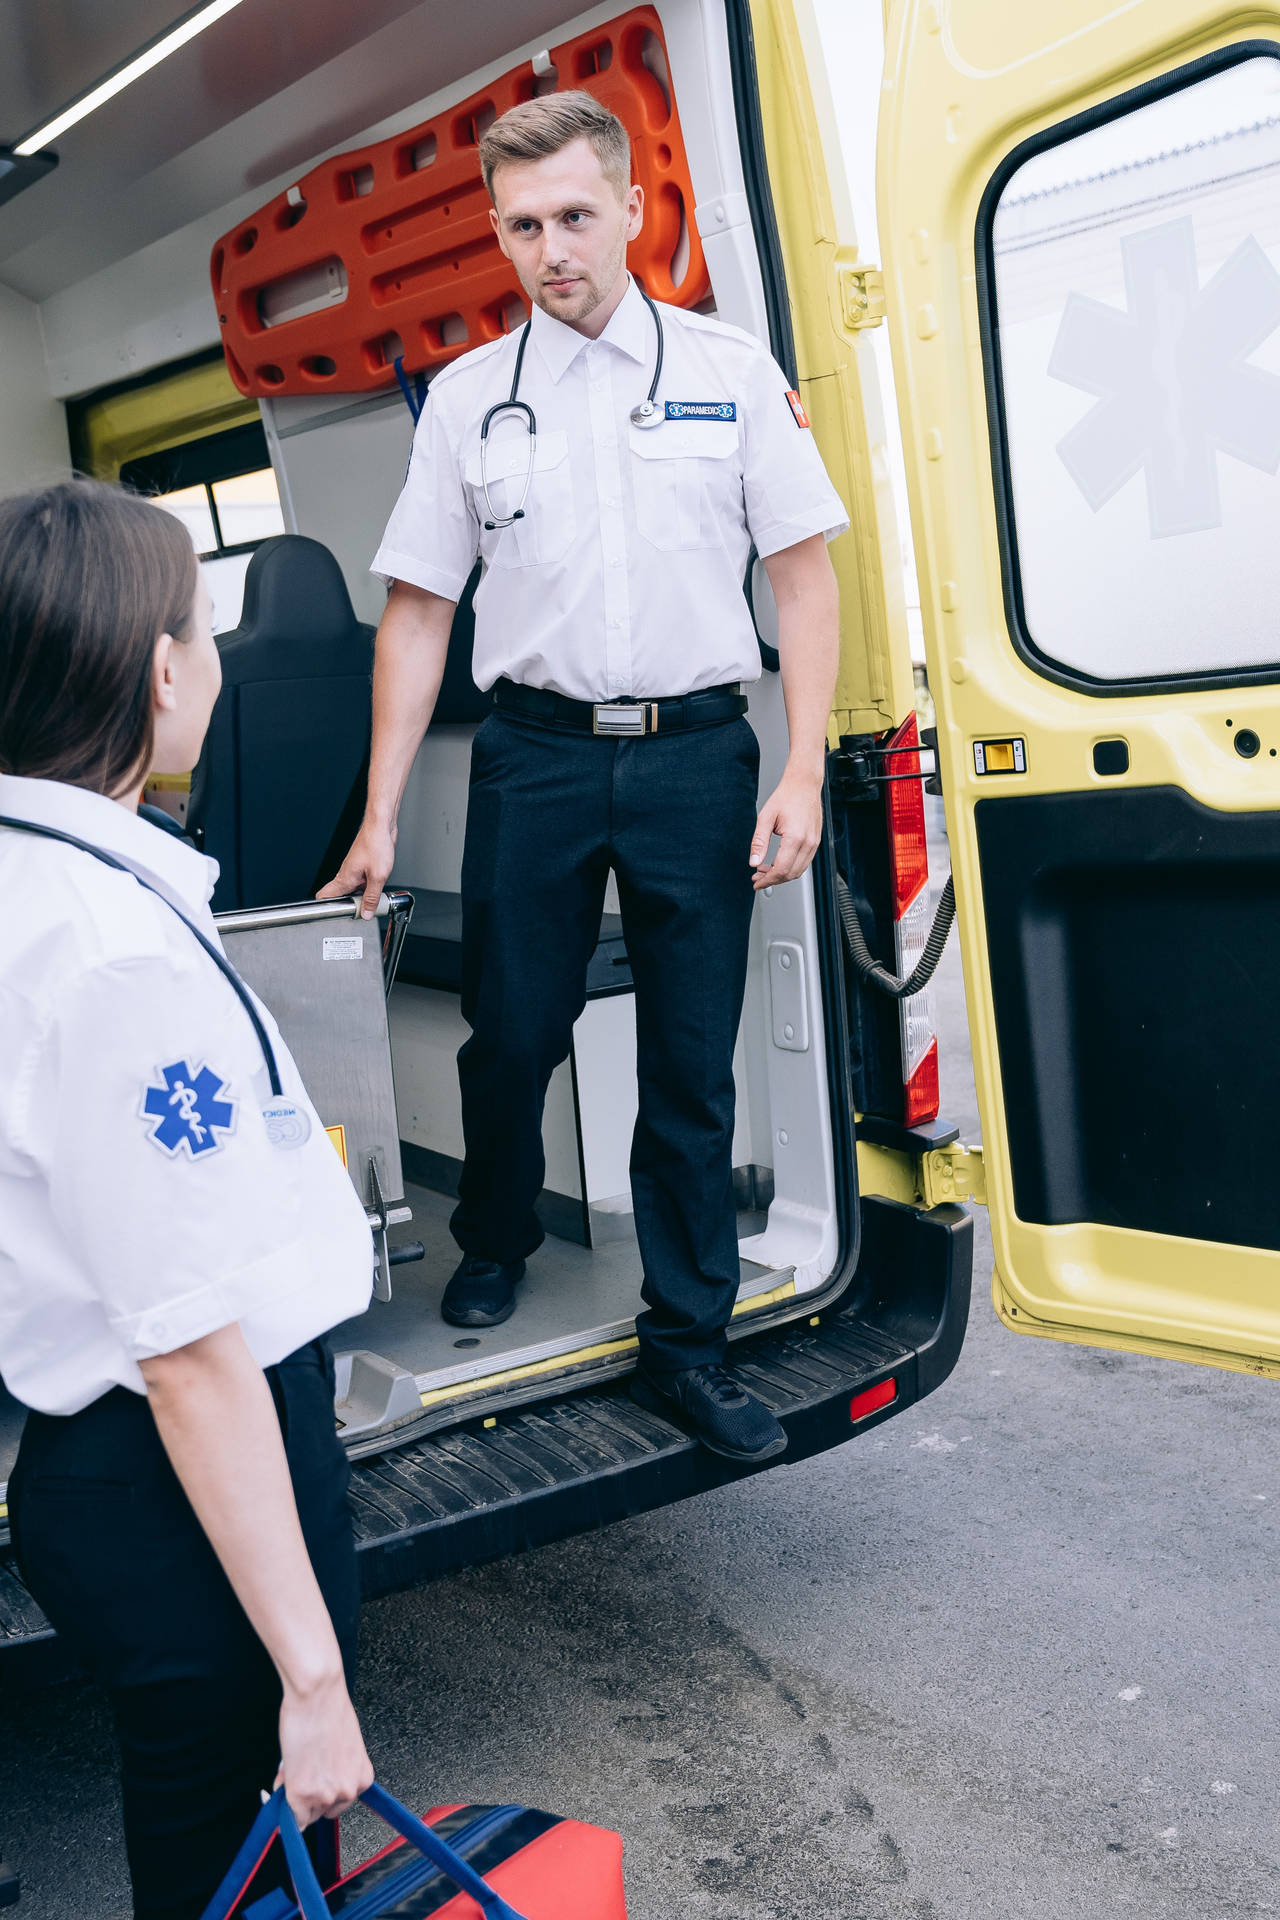 A committed paramedic standing inside an ambulance. Wallpaper